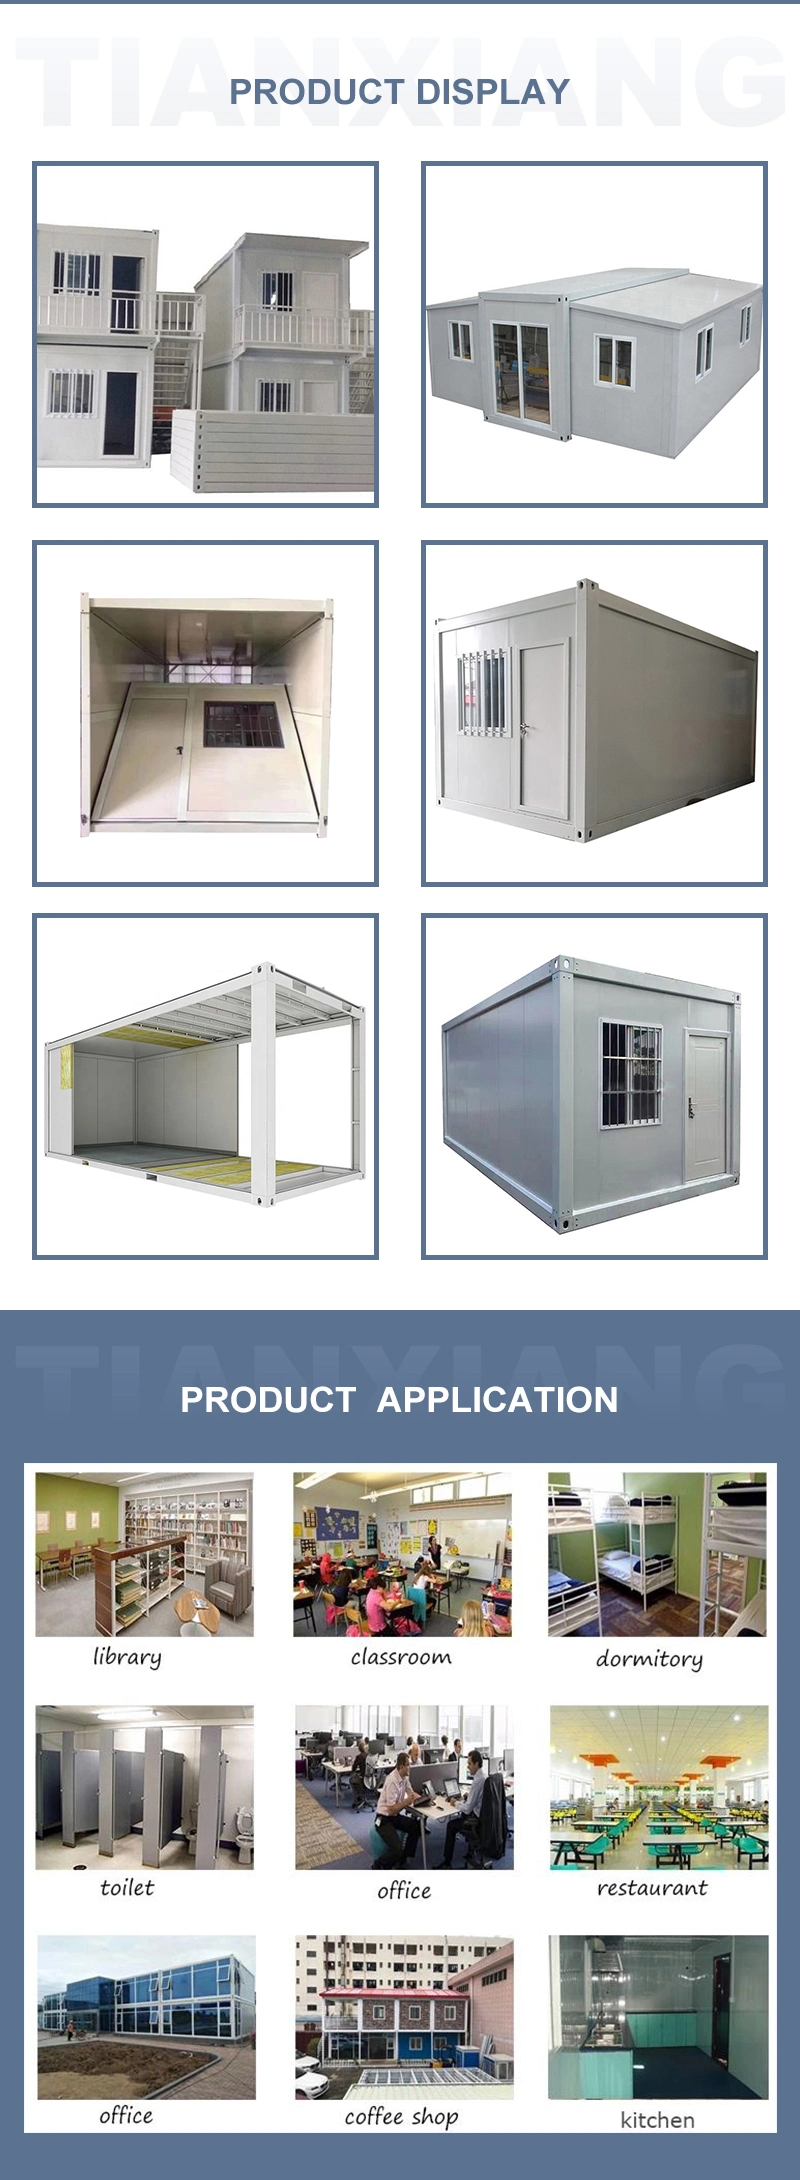 China Prefabricated Container Homes Prefab Container House and Container Resort Hotel House